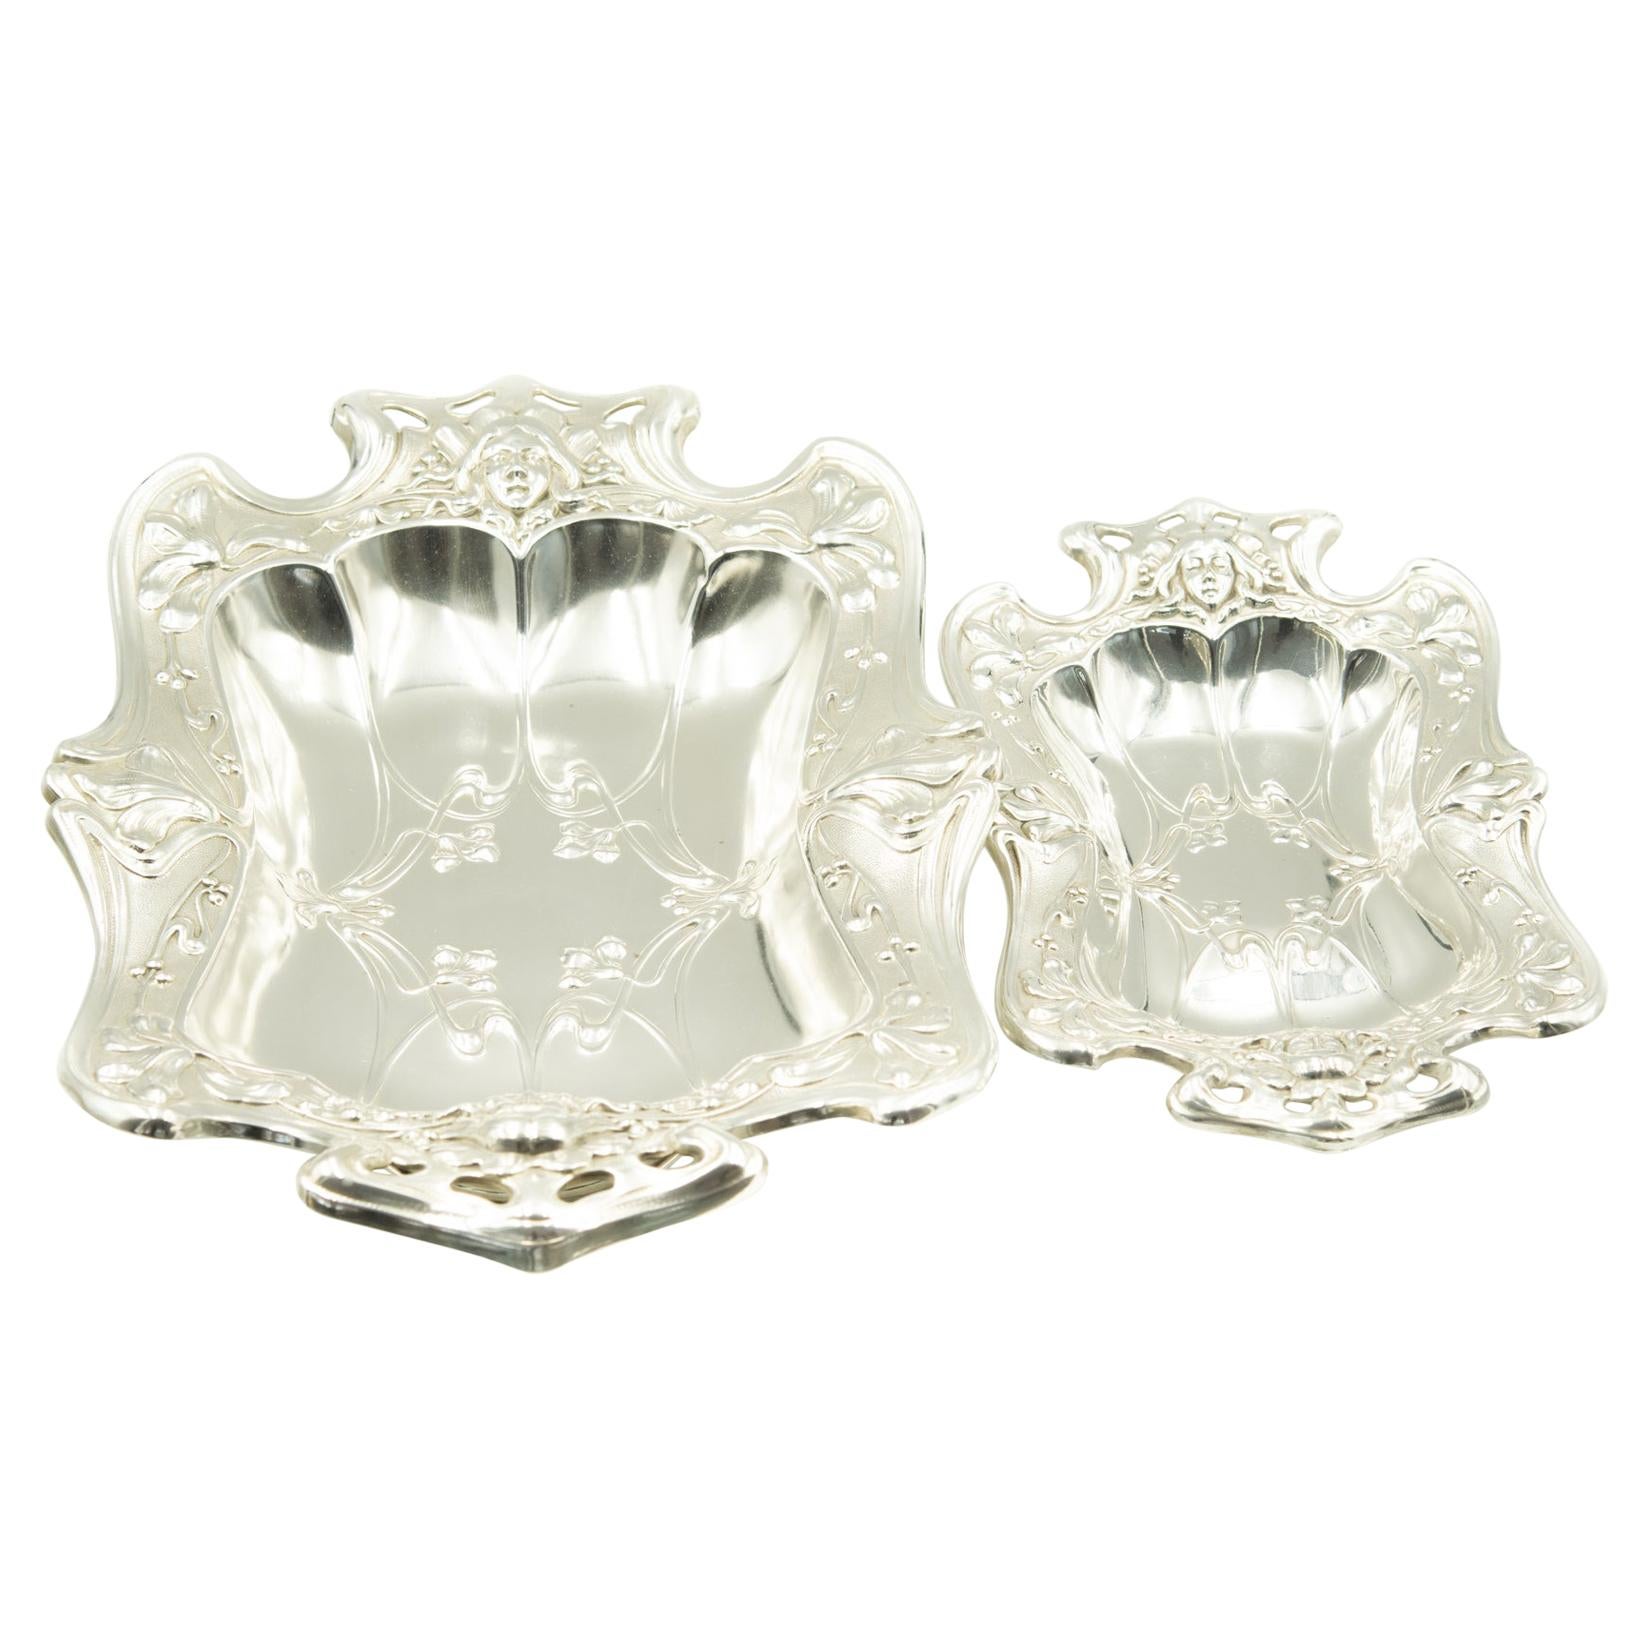 Pair of Art Nouveau Matched Silver Plate Serving Dishes Bowls with Women's Faces